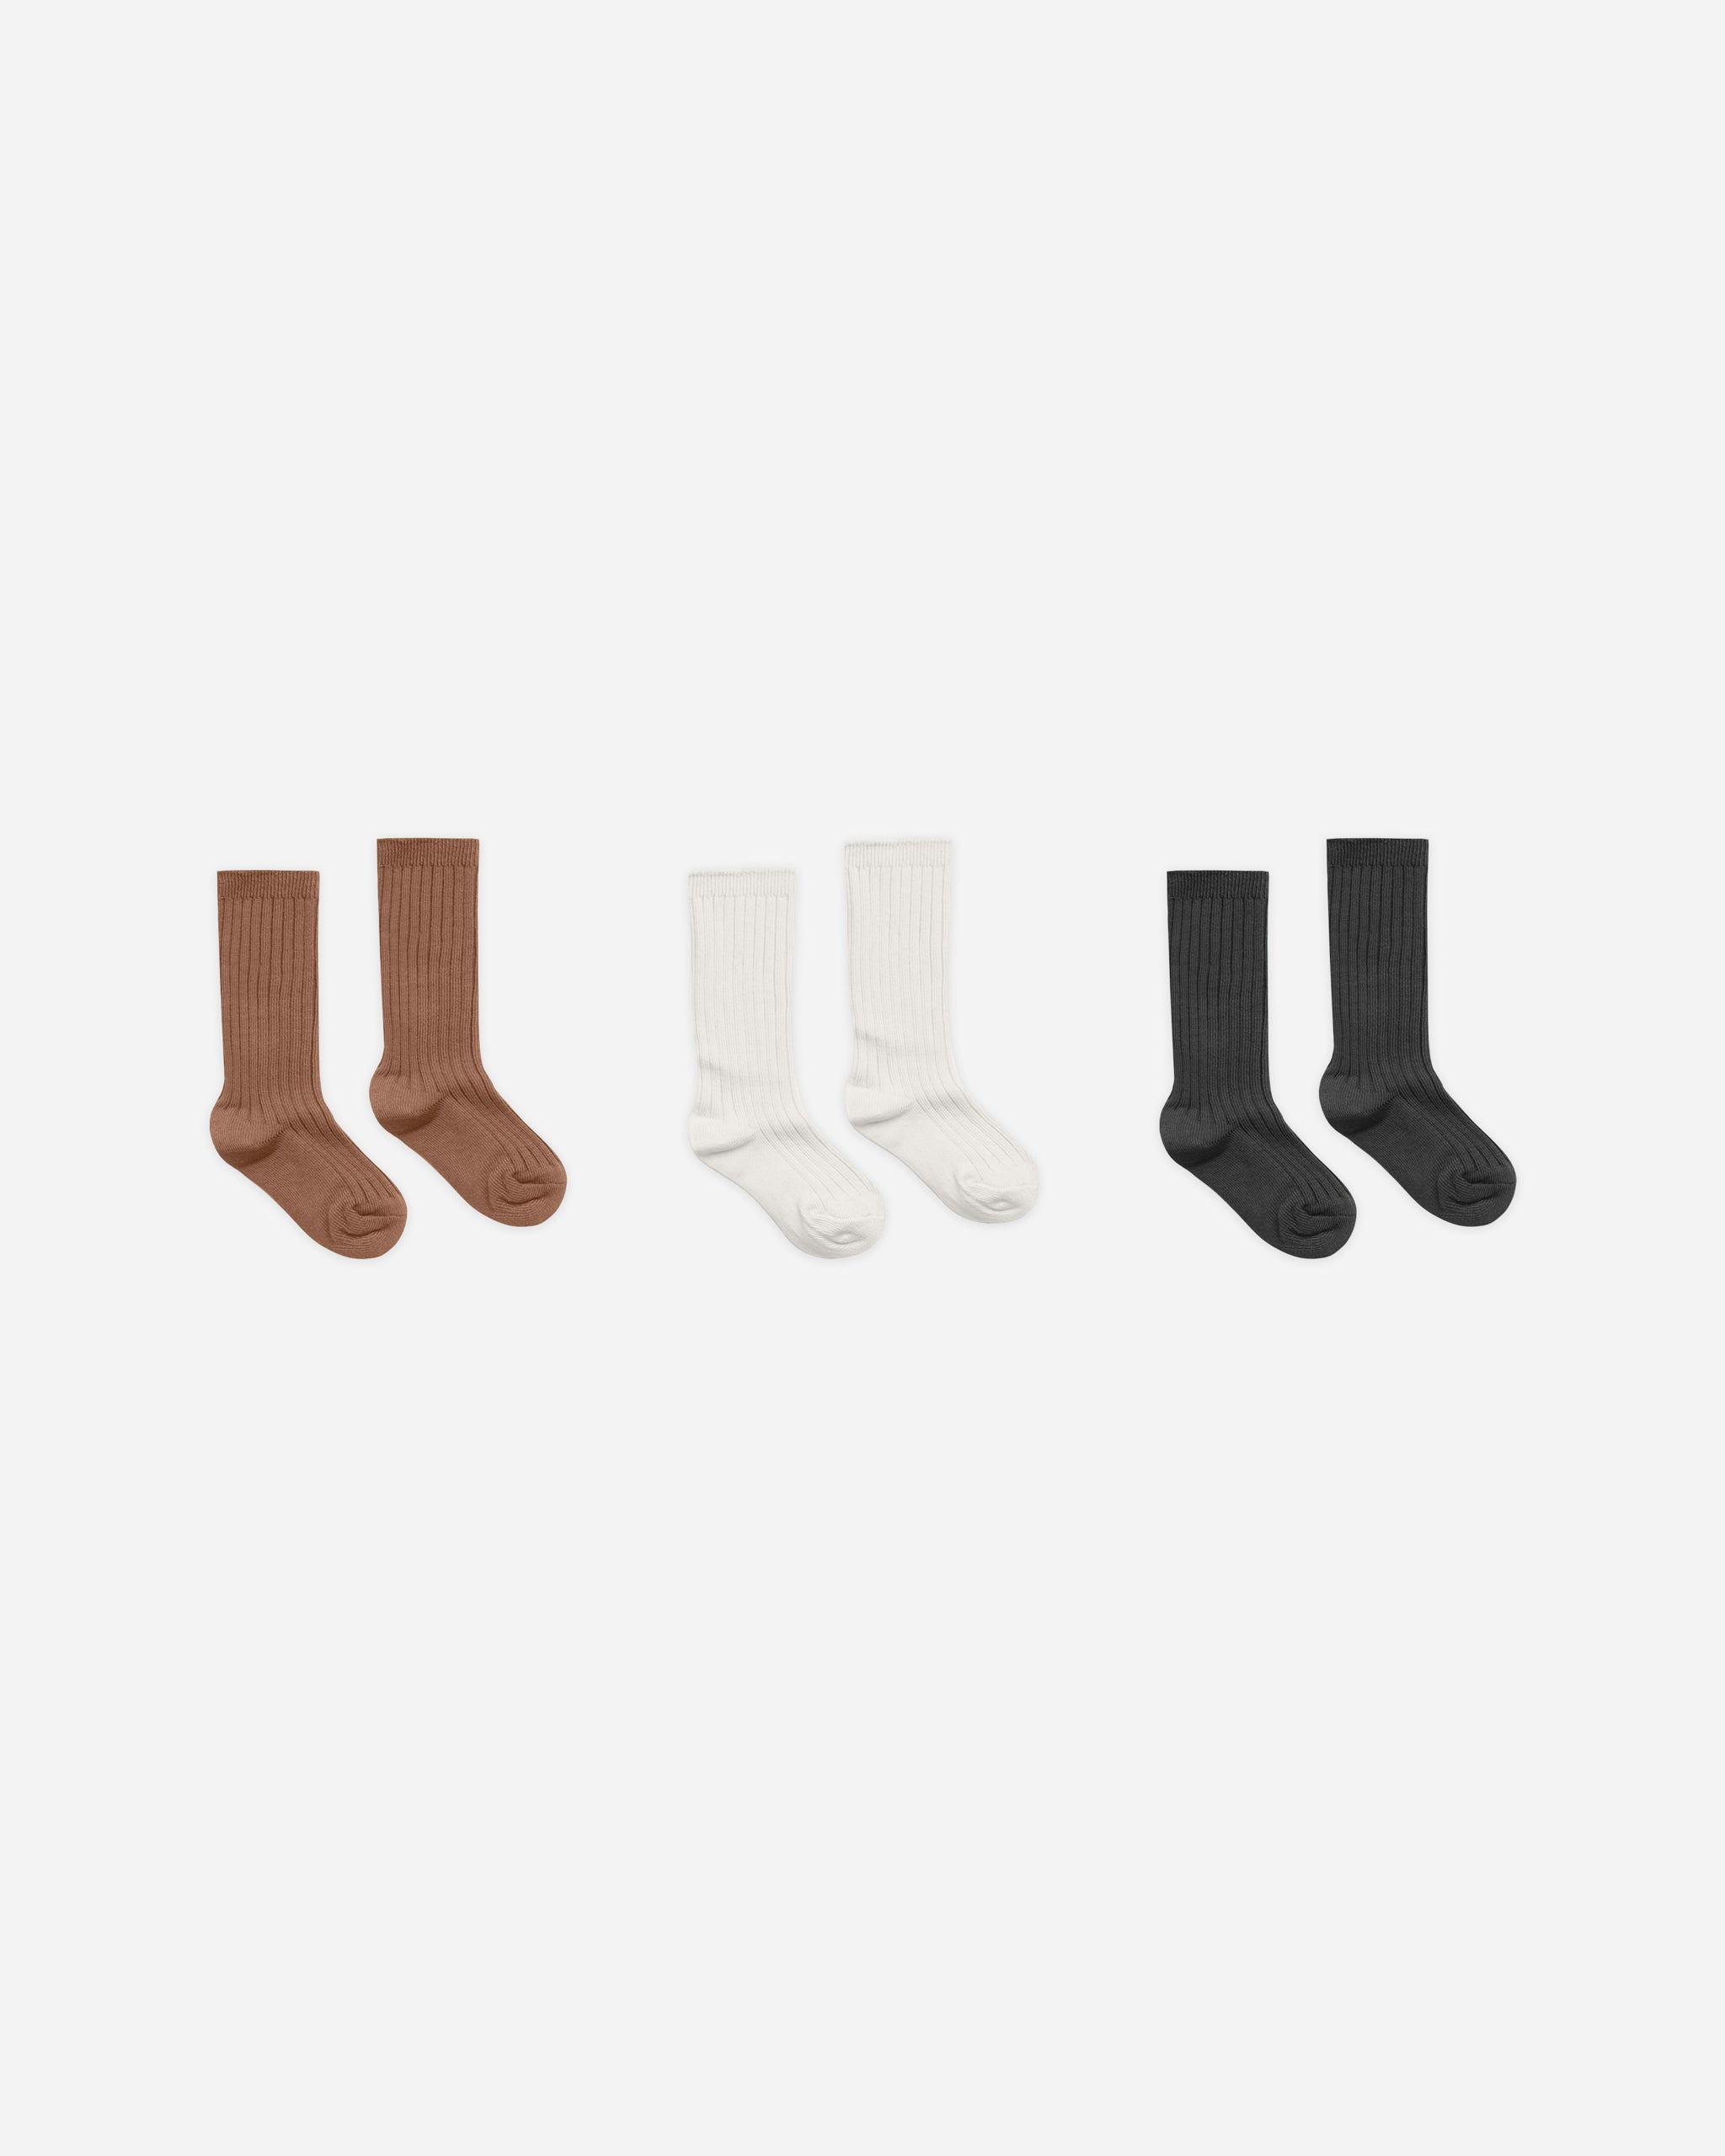 Ribbed Socks || Cedar / Ivory / Black - Rylee + Cru | Kids Clothes | Trendy Baby Clothes | Modern Infant Outfits |